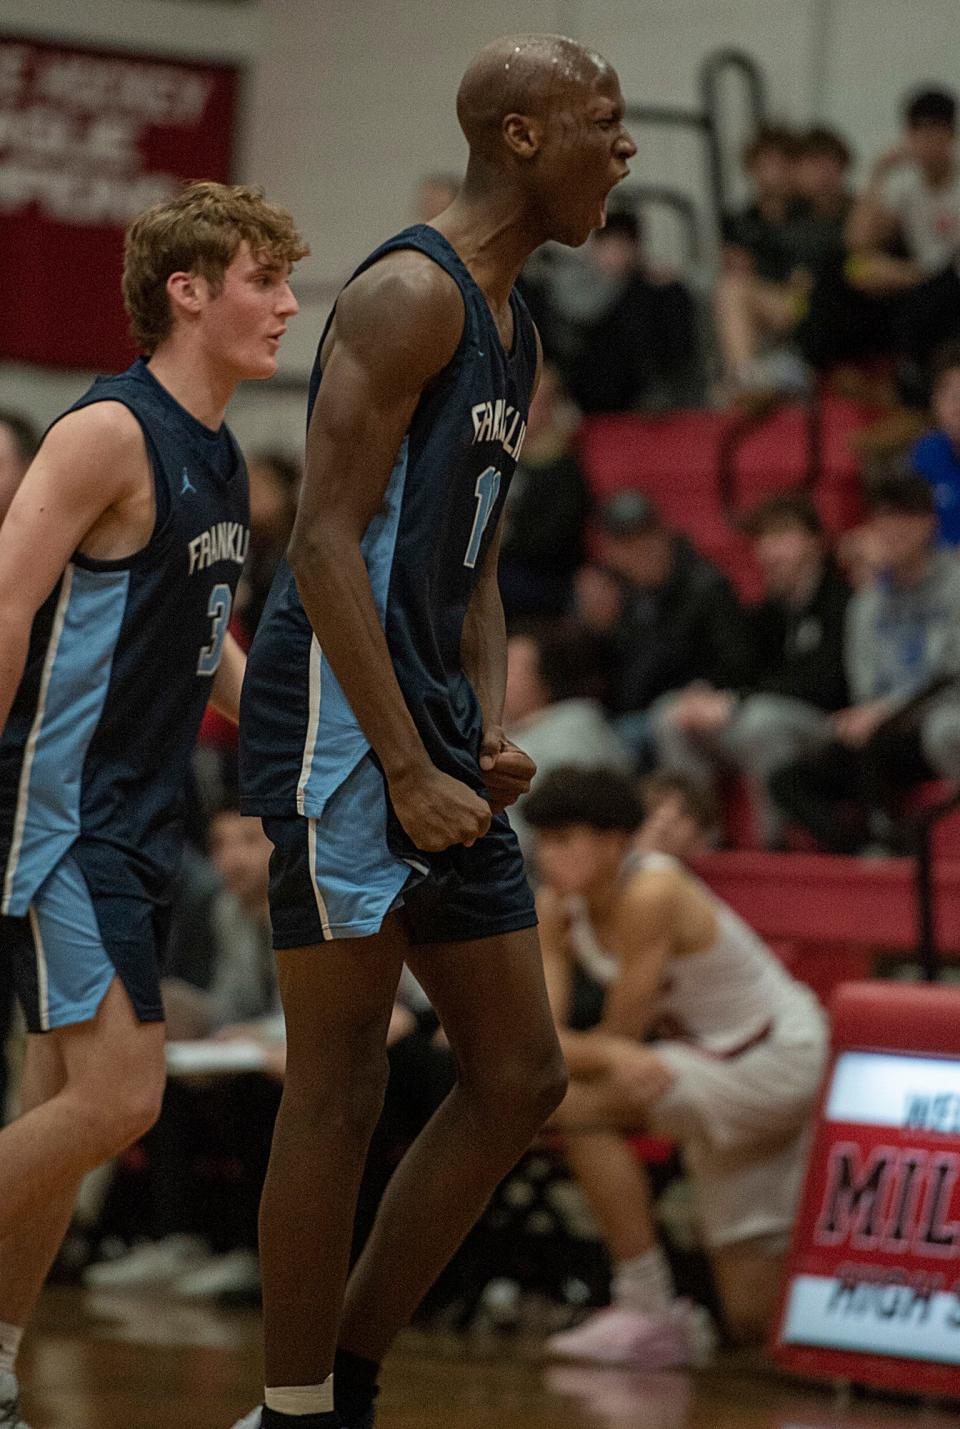 Franklin High School junior Hansy Jacques reacts after scoring against Milford, Feb. 17, 2023.